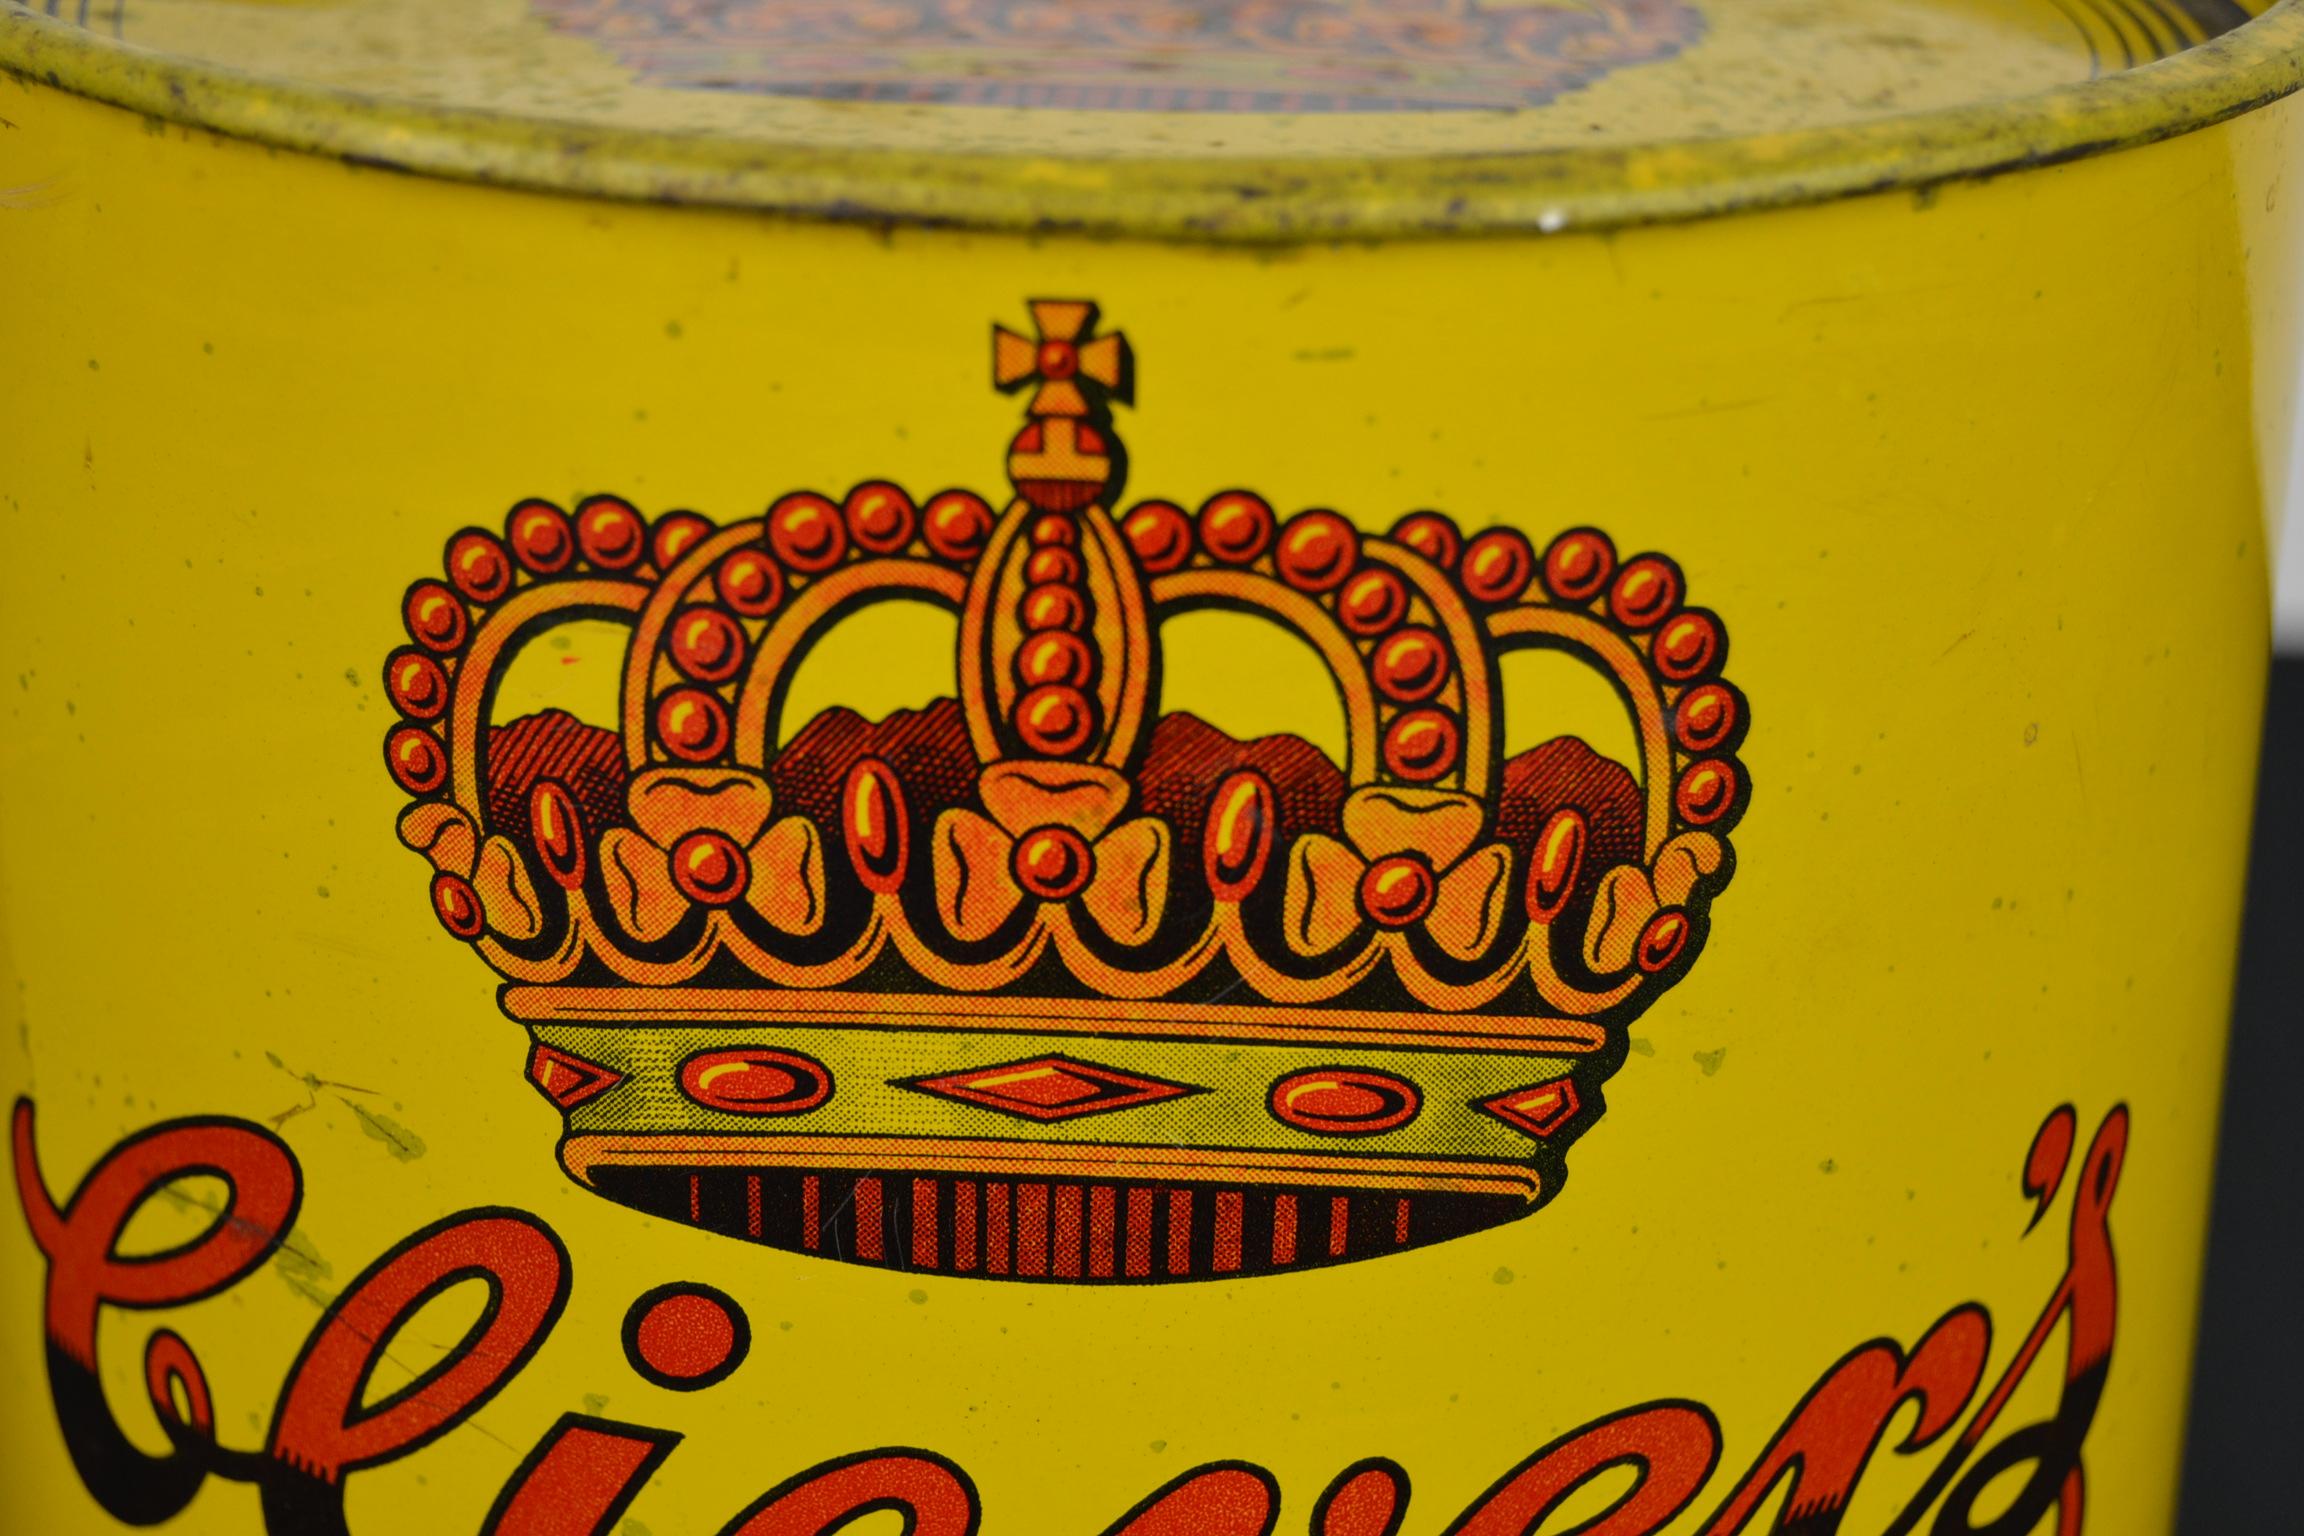 Vintage toffee tin with a royal crown. 
This yellow tin dates from the 1960s and has a 5 pointed red royal crown and beautiful lettering. 
It was designed for the Dutch toffee brand Clievers which was located in Rotterdam, The Netherlands